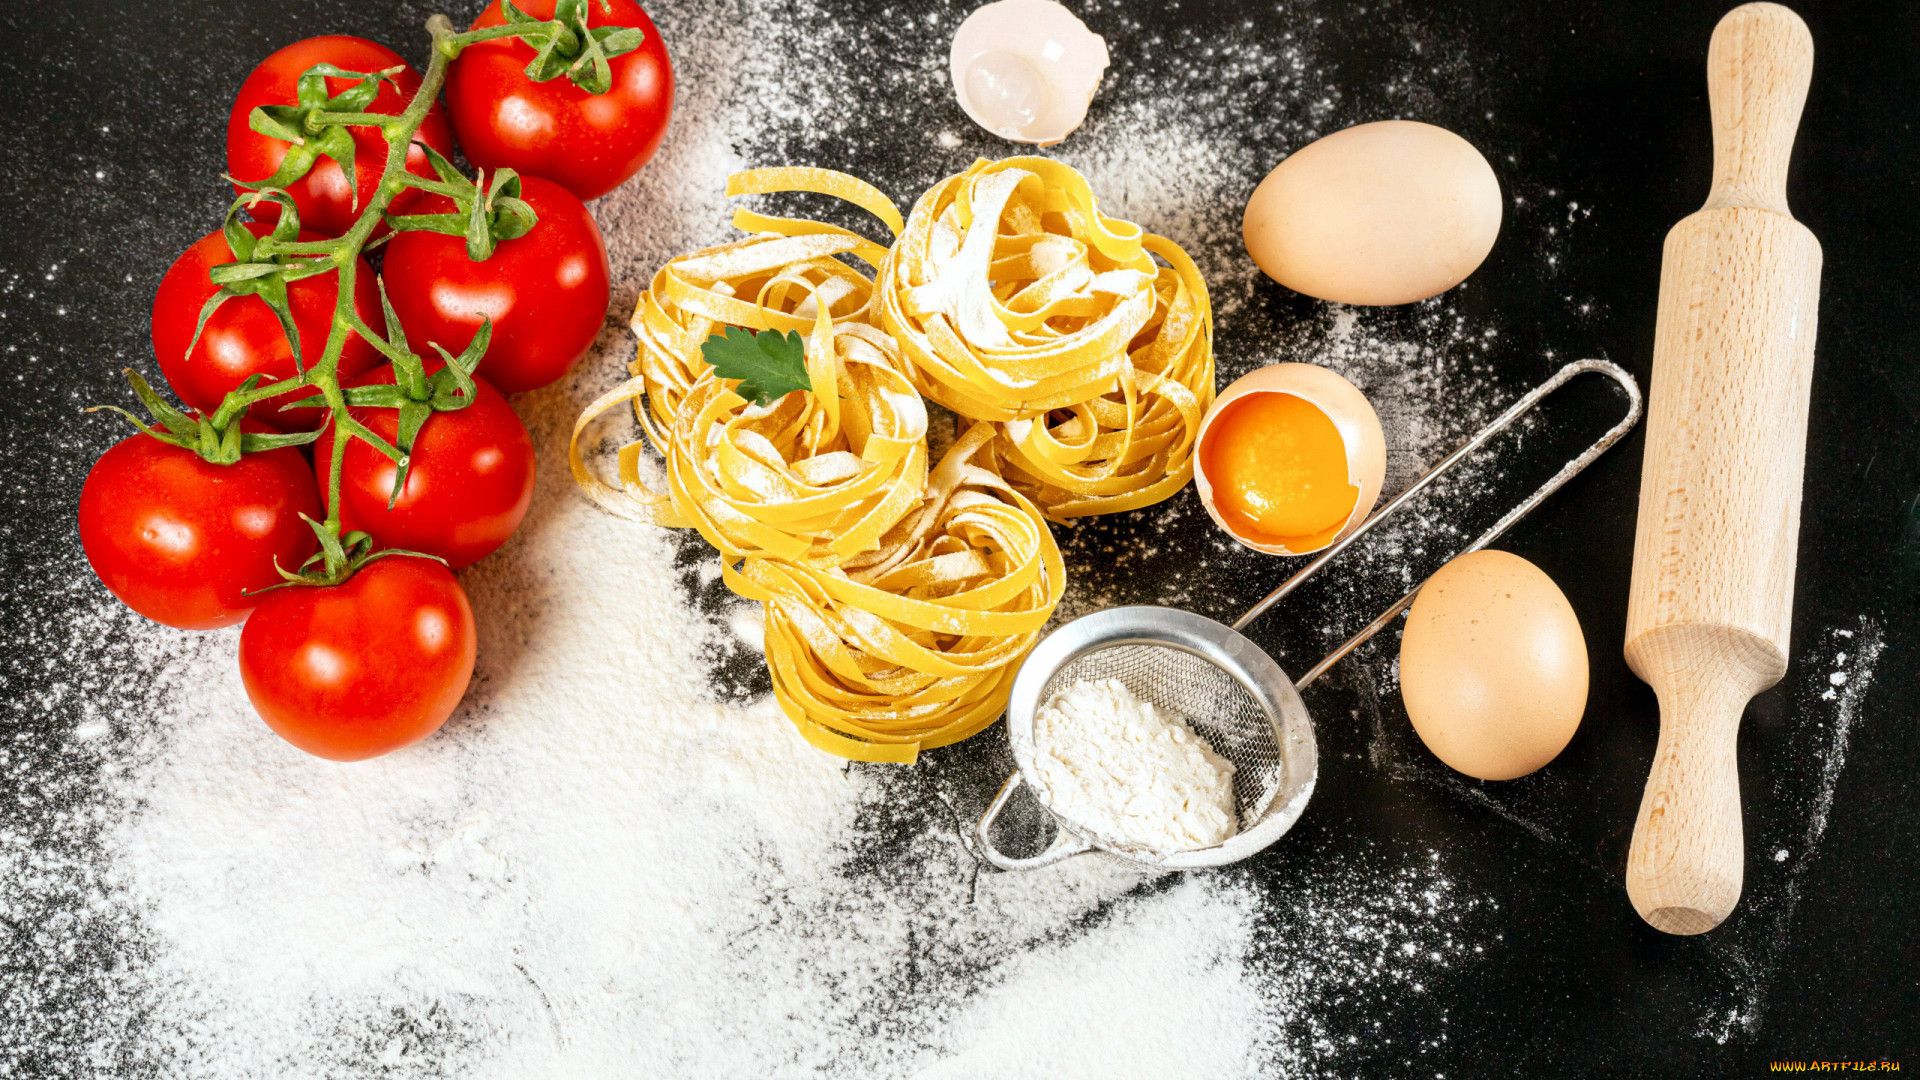 General 1920x1080 food tomatoes noodles eggs cooking rolling pin pasta flour